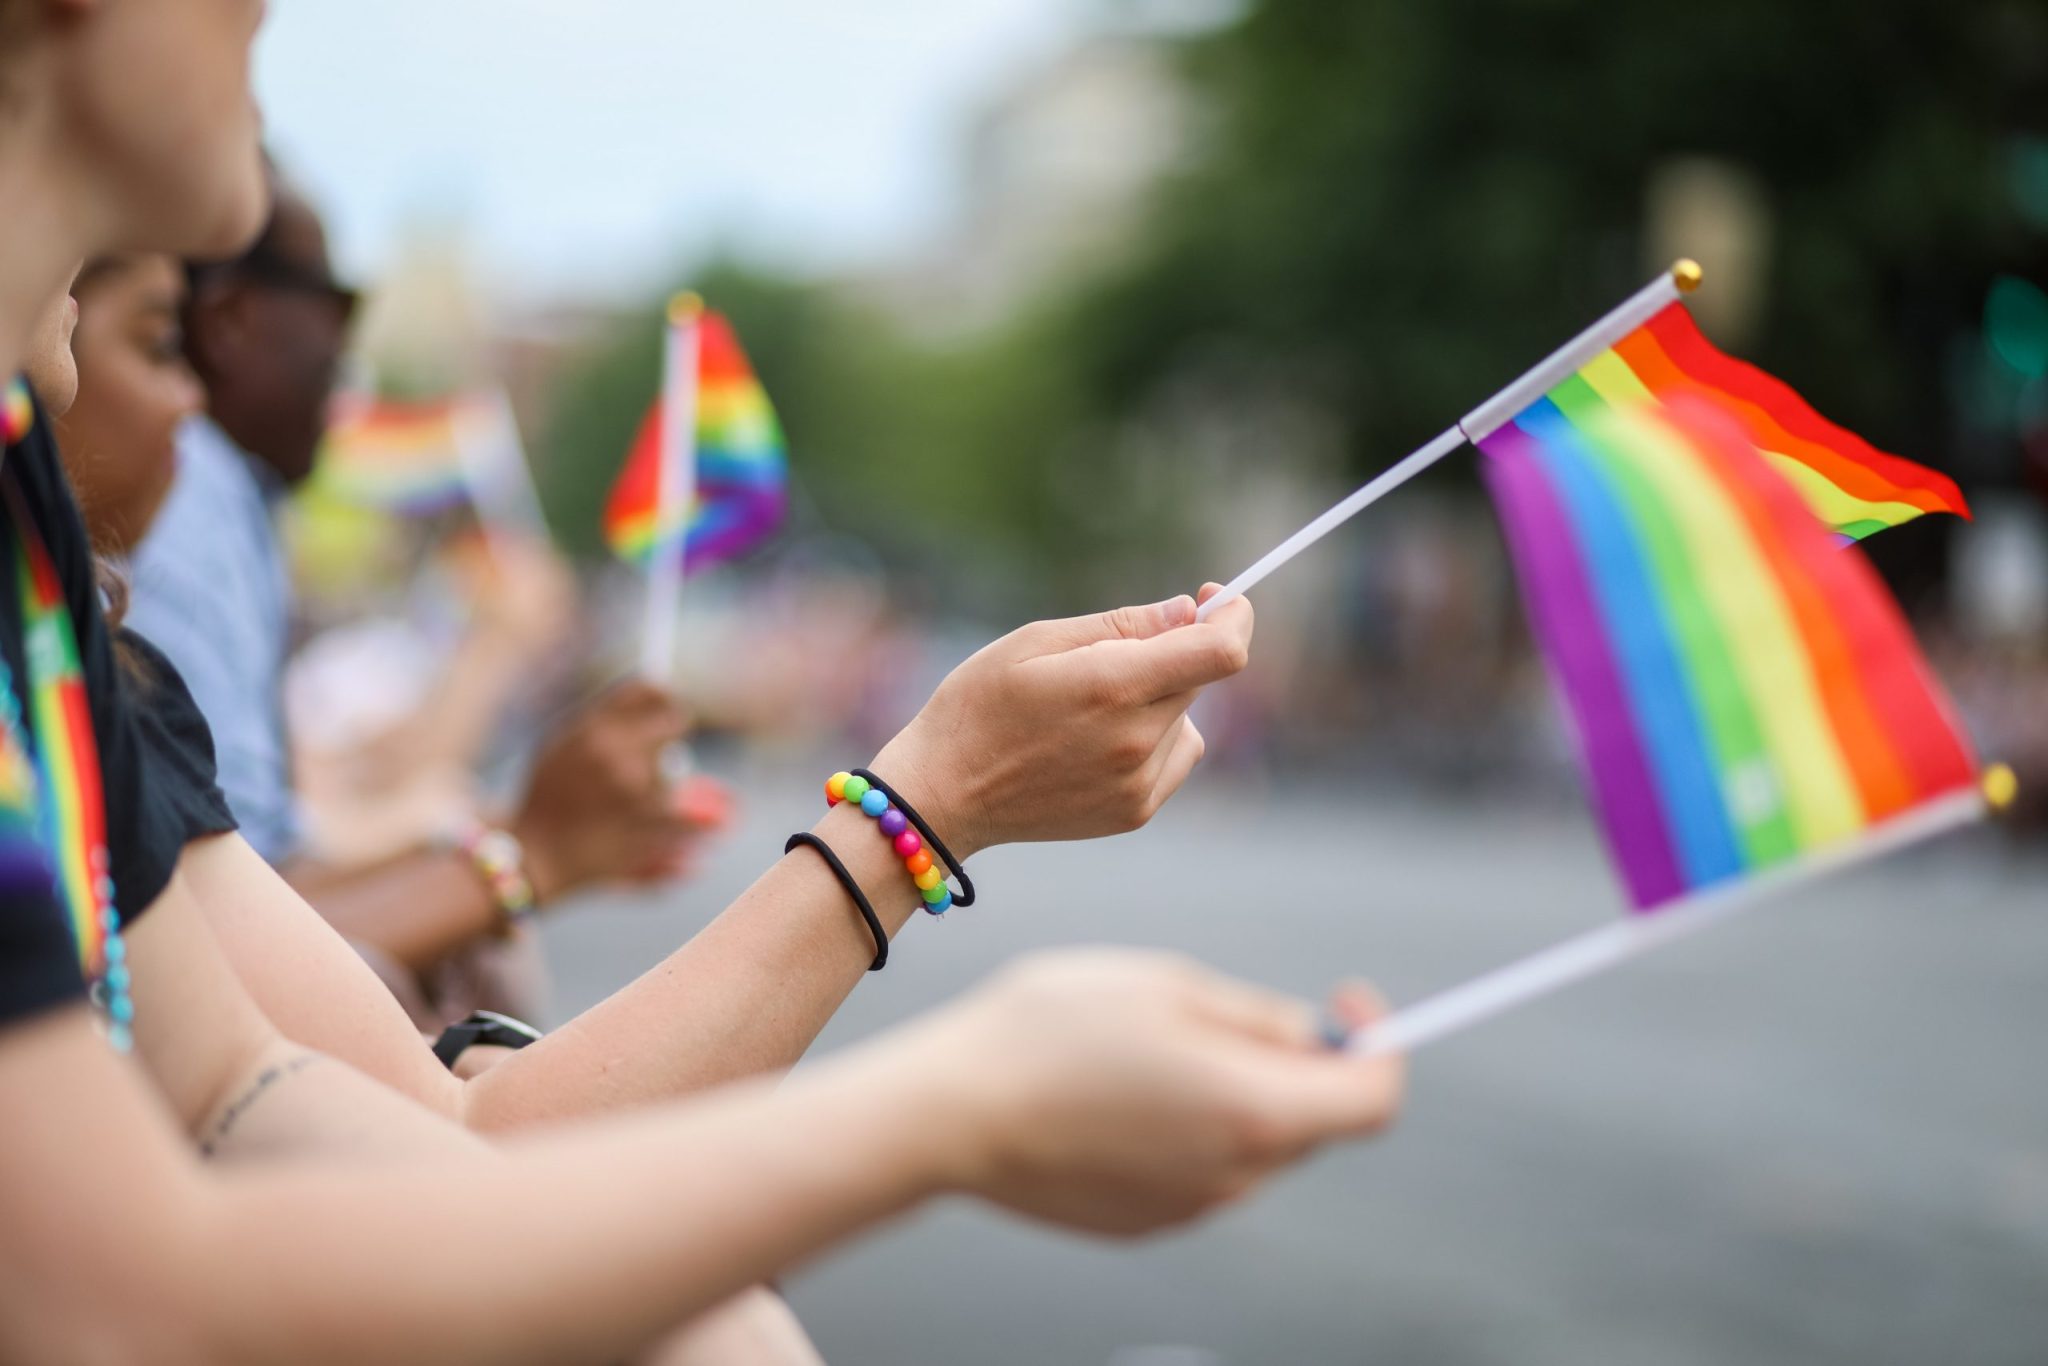 People wave rainbow flags at a Pride parade to celebrate LGBTQ+ rights.